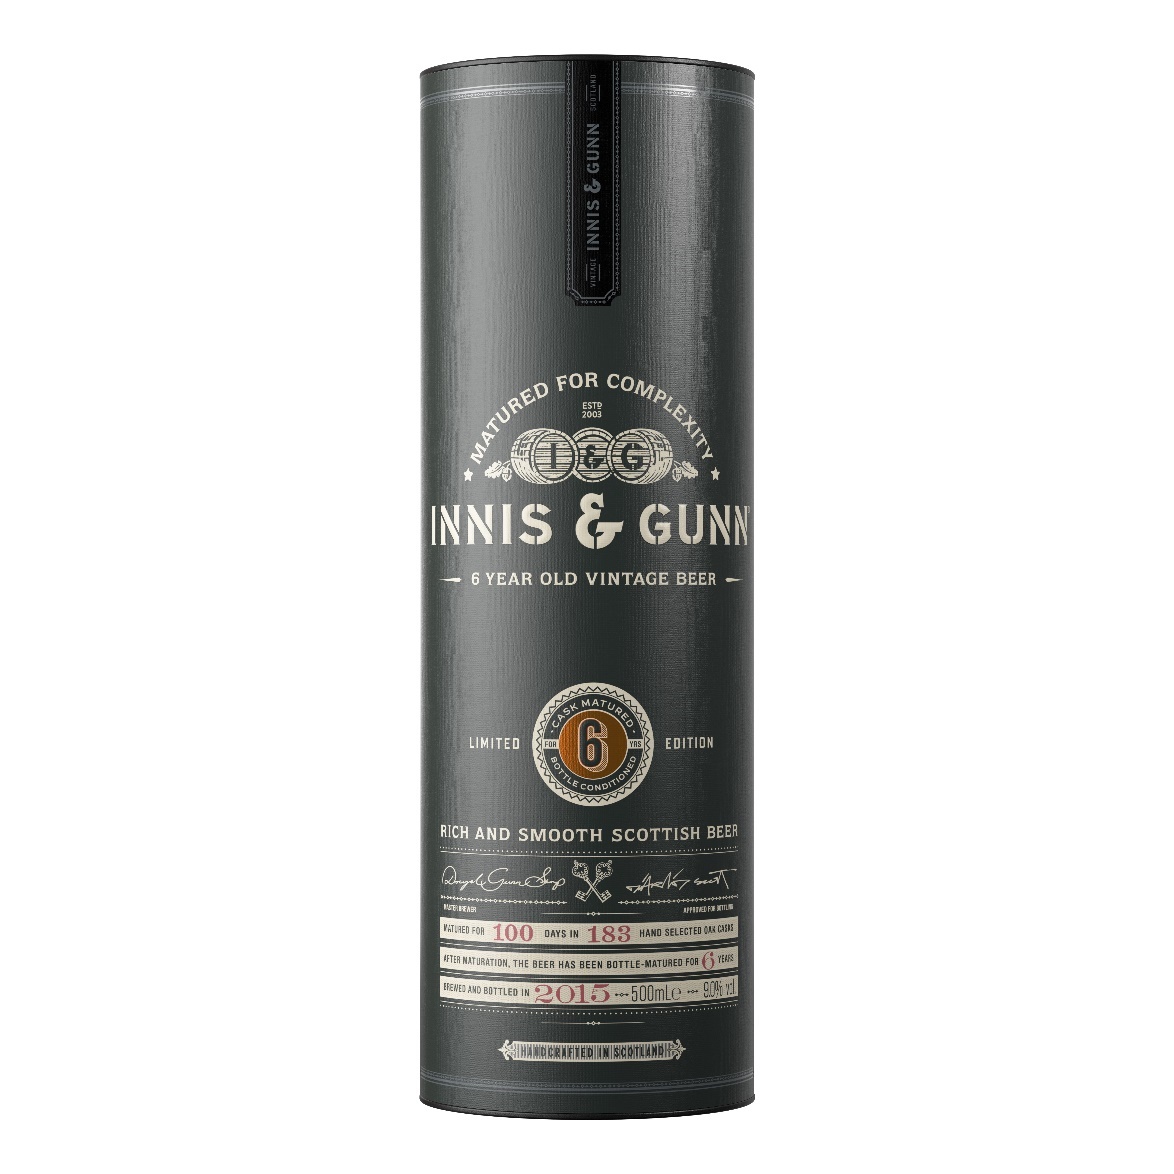 Gift box of Innis & Gunn 6 year vintage: Scottish craft brewer launches expensive vintage priced at £25 a bottle